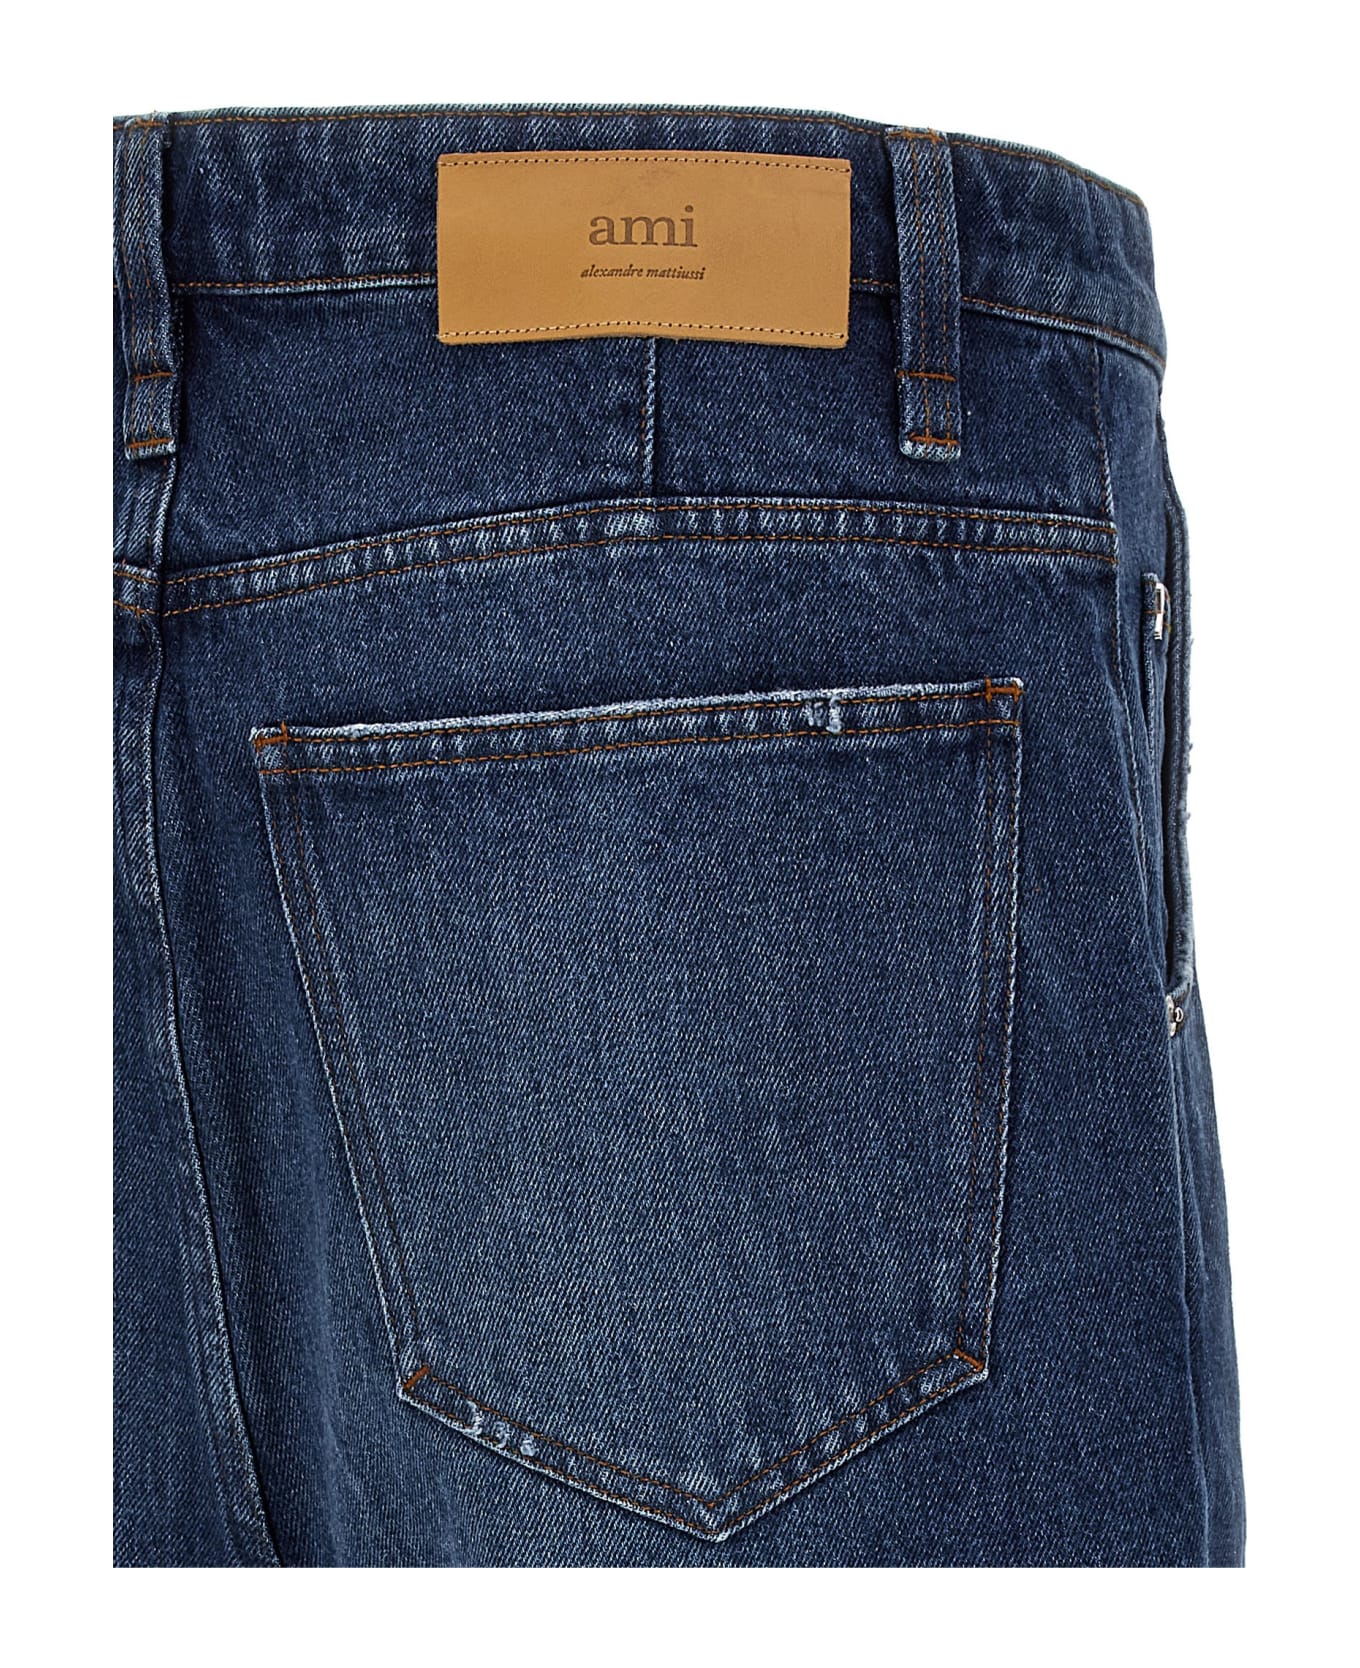 Ami Alexandre Mattiussi Baggy Jeans - USED BLUE